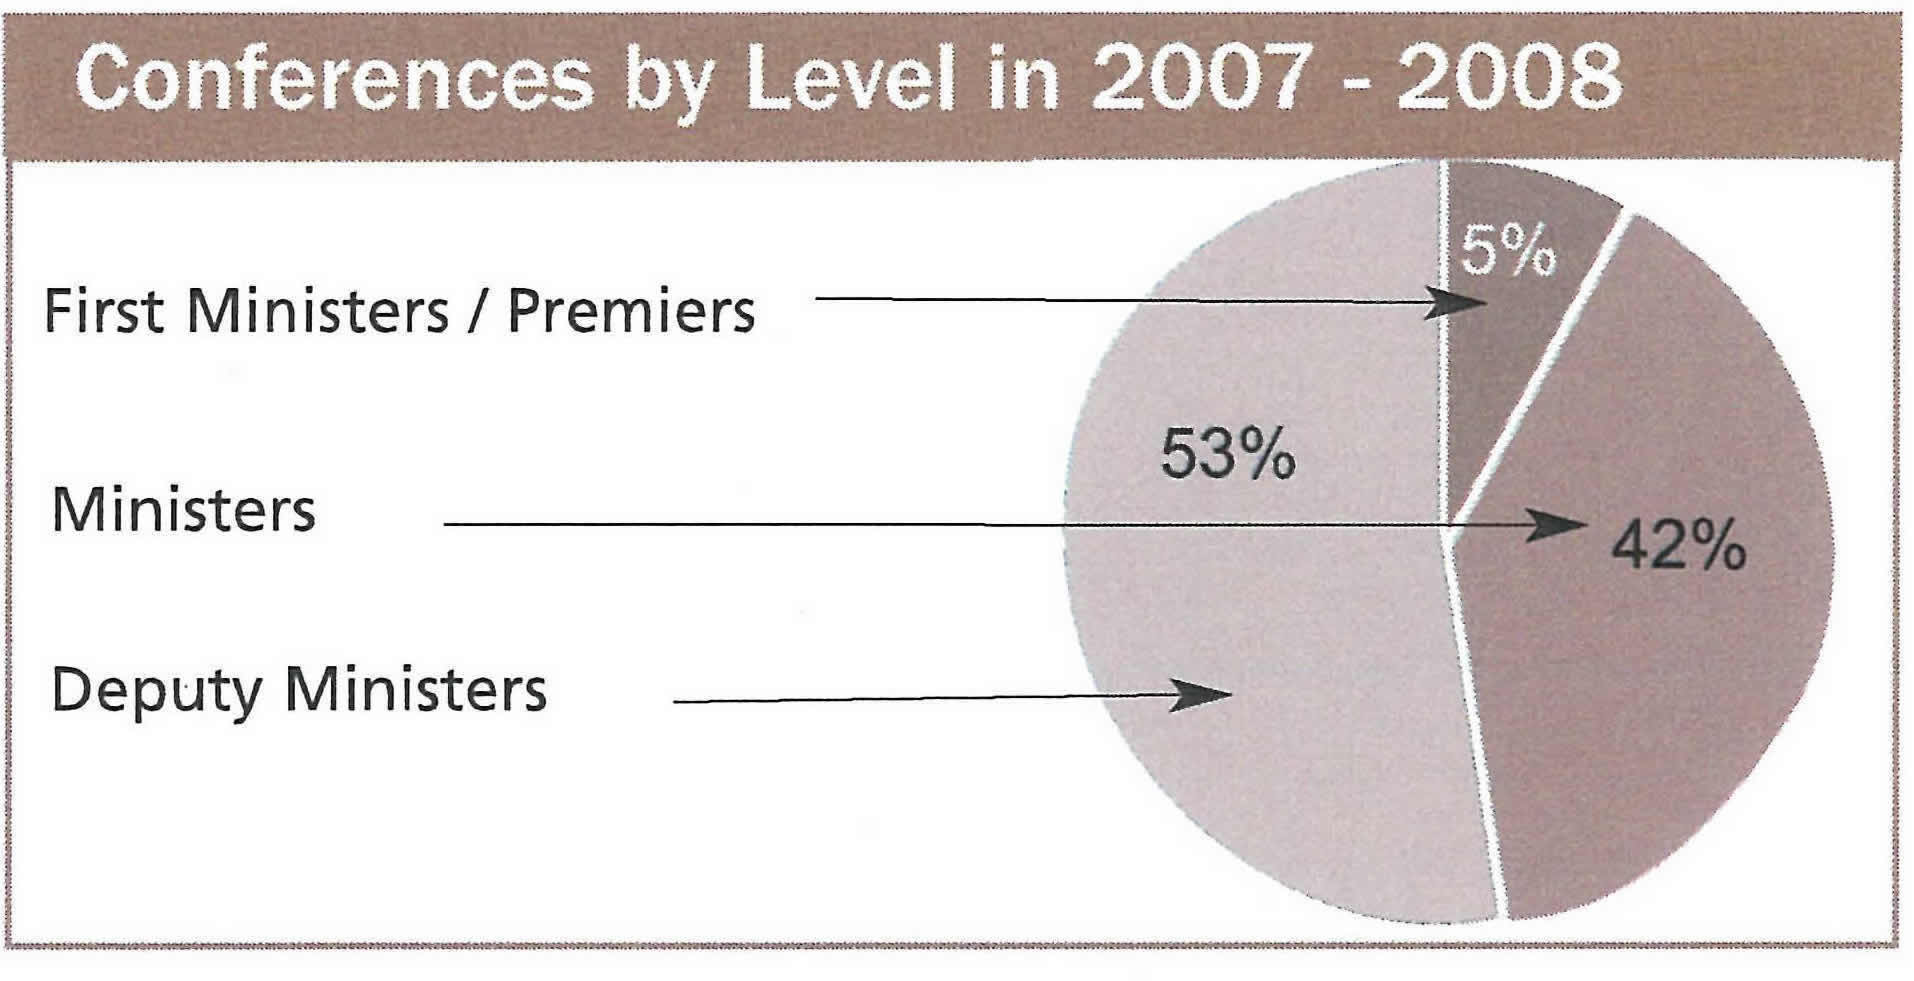 Percentage of conferences served by each level: (1) First Ministers/Premiers, (2) Ministers and (3) Deputy Ministers in 2007-2008.